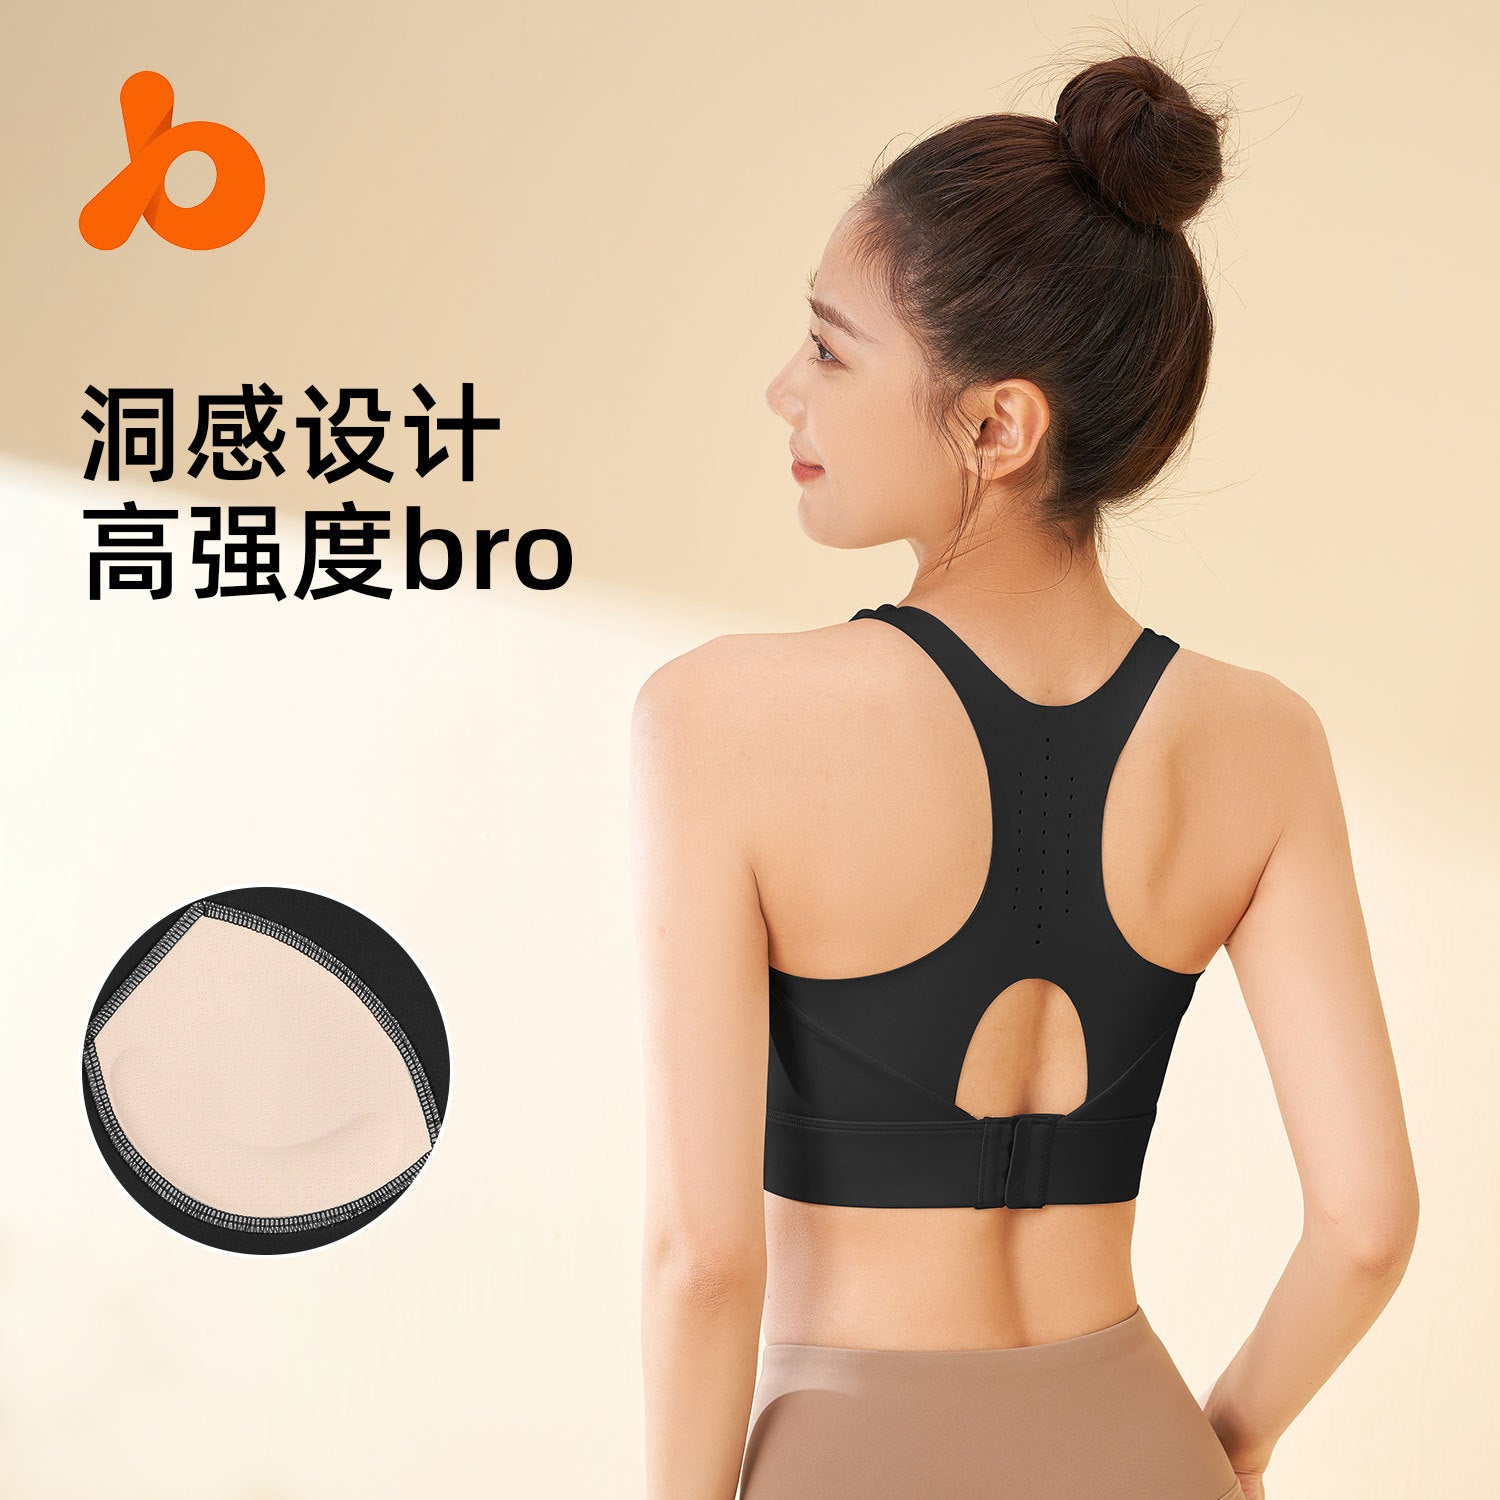 Juyitang high-strength shockproof sports bra gathers holes and feels breasted bra quick-drying breathable sports bra.